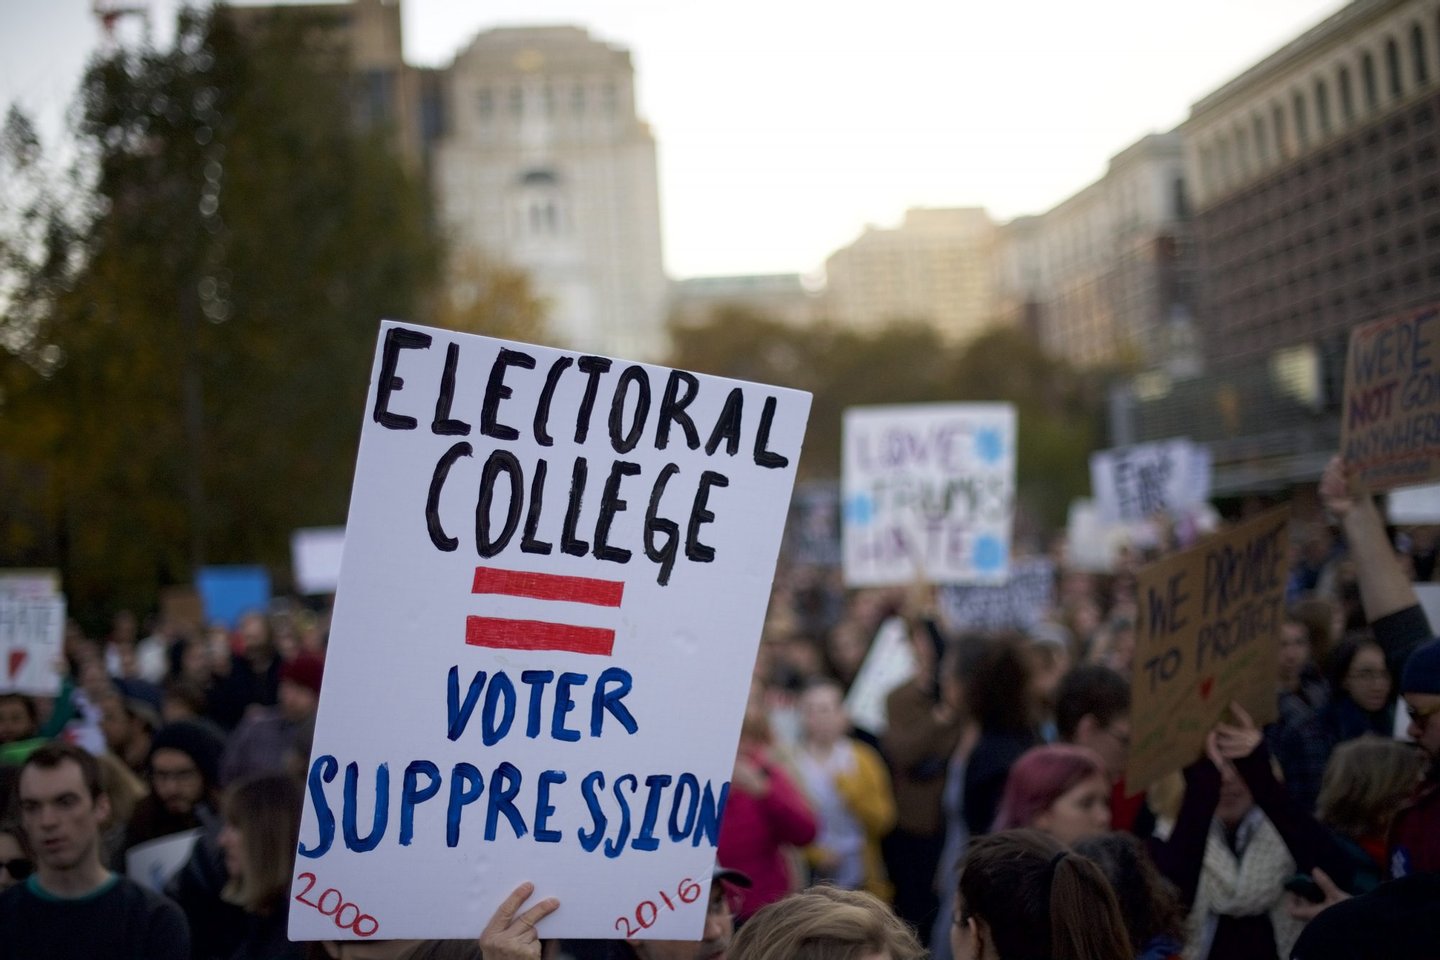 PHILADELPHIA, PA - NOVEMBER 13: Protestors demonstrate against President-elect Donald Trump outside Independence Hall November 13, 2016 in Philadelphia, Pennsylvania. The Republican candidate lost the popular vote by more than a million votes, but won the electoral college. (Photo by Mark Makela/Getty Images)